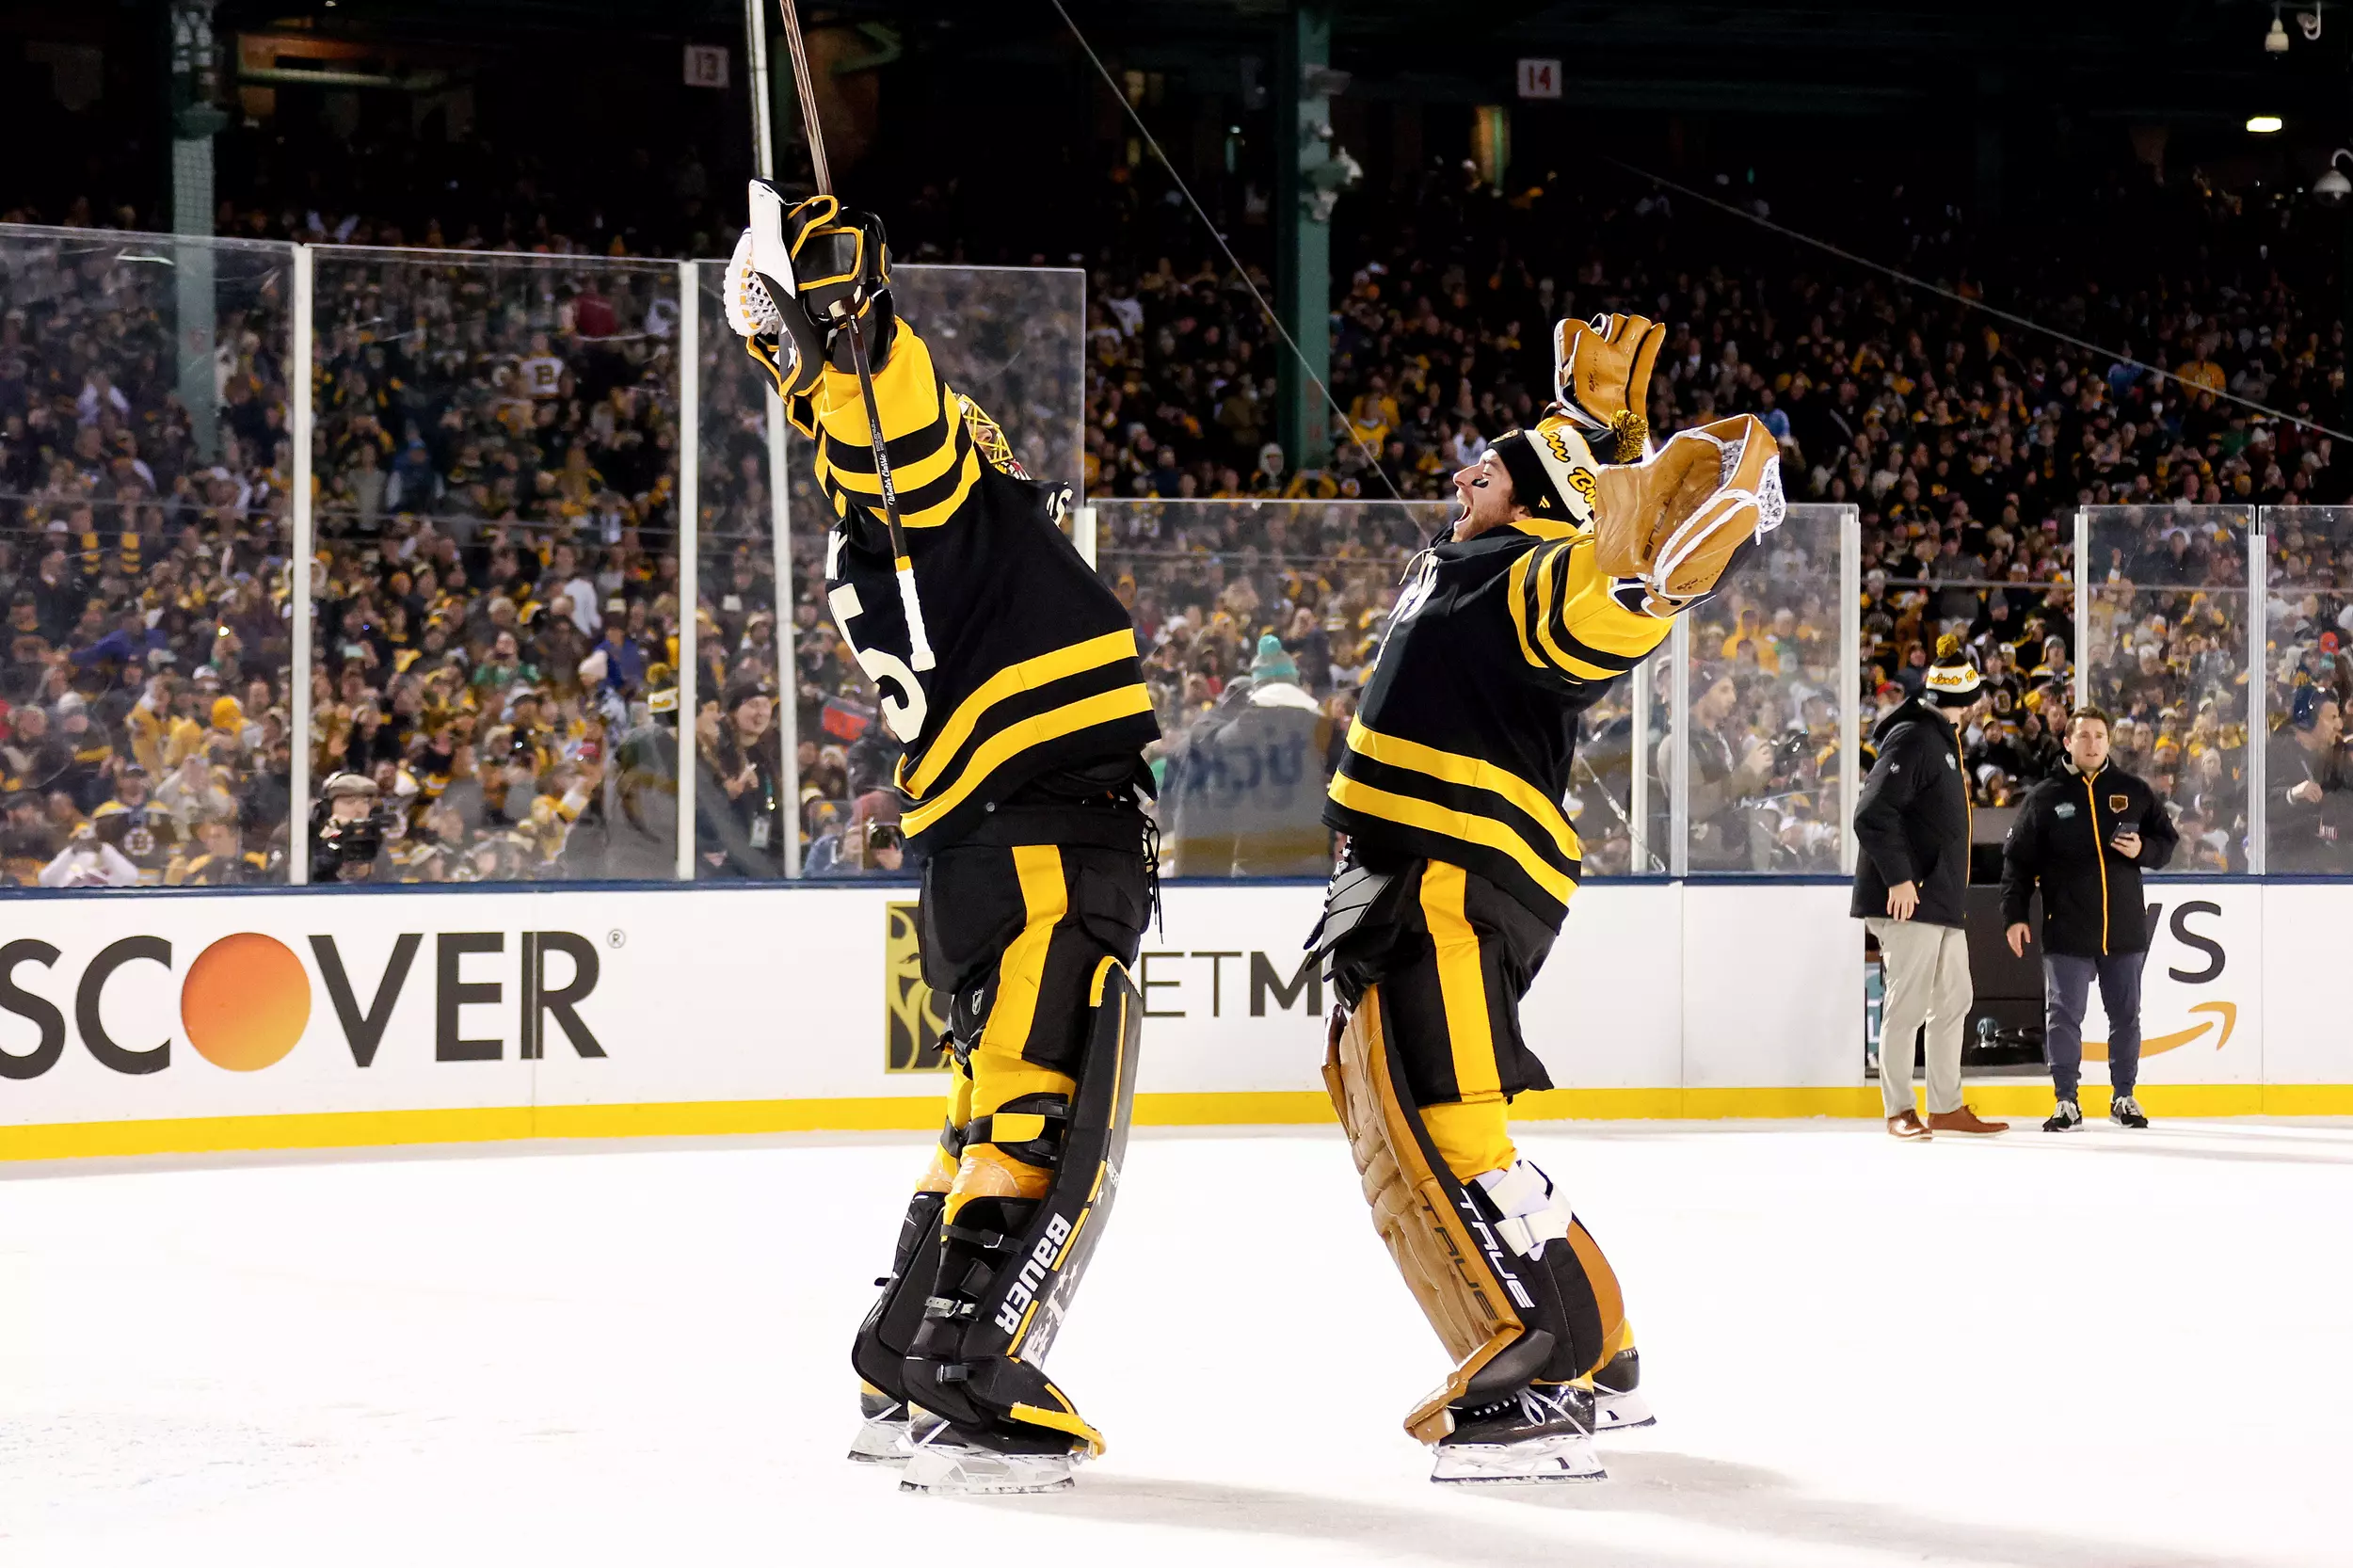 When the Penguins and Bruins meet in the Winter Classic, 2 fans and  charities win